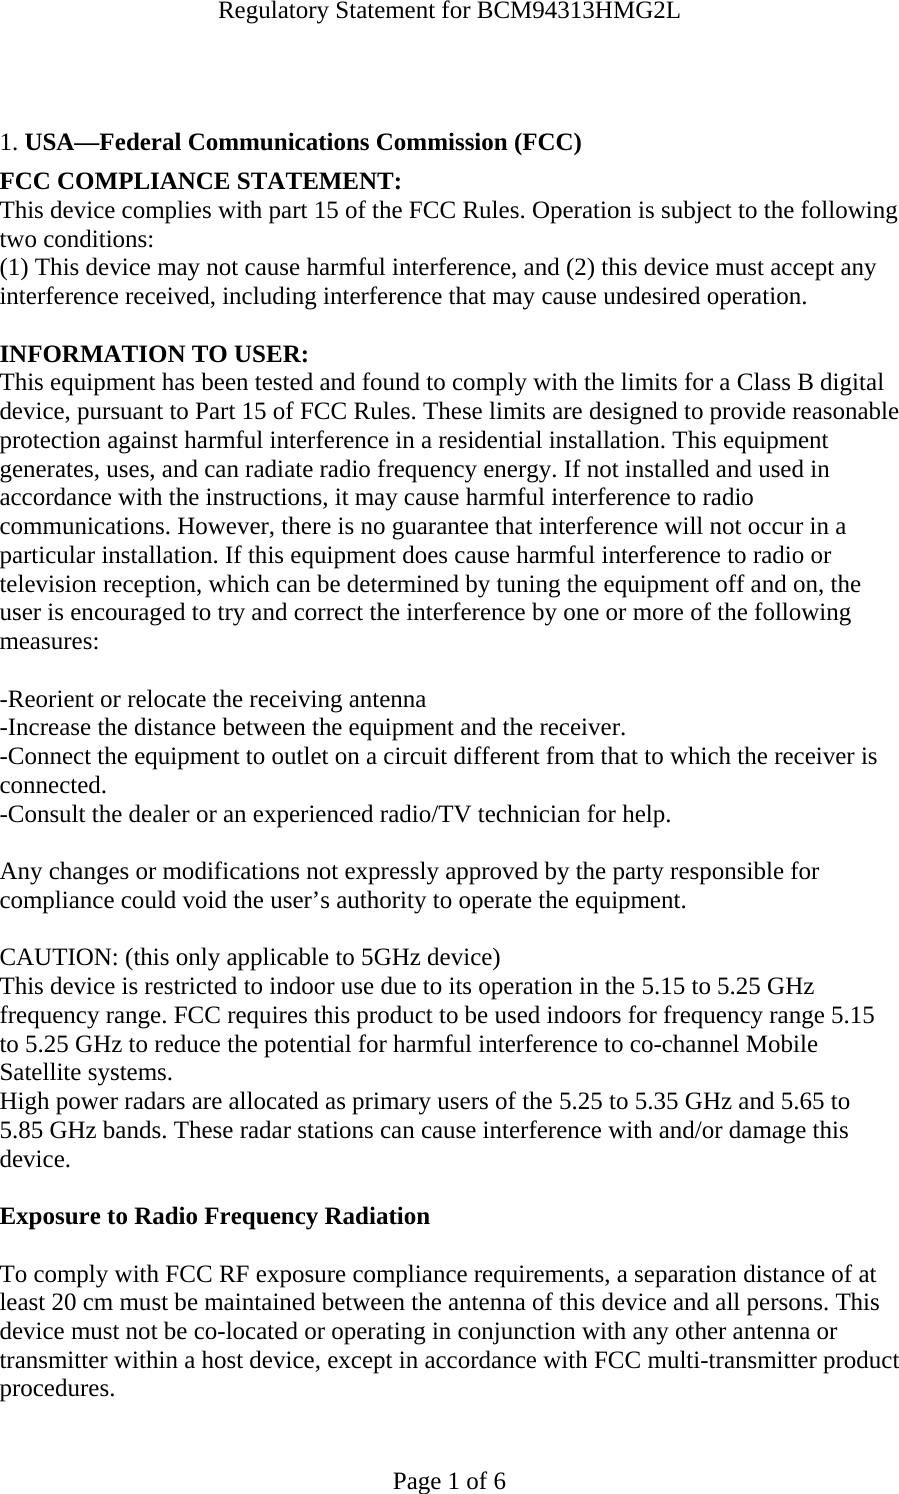 Regulatory Statement for BCM94313HMG2L  Page 1 of 6   1. USA—Federal Communications Commission (FCC) FCC COMPLIANCE STATEMENT: This device complies with part 15 of the FCC Rules. Operation is subject to the following two conditions: (1) This device may not cause harmful interference, and (2) this device must accept any interference received, including interference that may cause undesired operation.  INFORMATION TO USER: This equipment has been tested and found to comply with the limits for a Class B digital device, pursuant to Part 15 of FCC Rules. These limits are designed to provide reasonable protection against harmful interference in a residential installation. This equipment generates, uses, and can radiate radio frequency energy. If not installed and used in accordance with the instructions, it may cause harmful interference to radio communications. However, there is no guarantee that interference will not occur in a particular installation. If this equipment does cause harmful interference to radio or television reception, which can be determined by tuning the equipment off and on, the user is encouraged to try and correct the interference by one or more of the following measures:   -Reorient or relocate the receiving antenna -Increase the distance between the equipment and the receiver. -Connect the equipment to outlet on a circuit different from that to which the receiver is connected. -Consult the dealer or an experienced radio/TV technician for help.  Any changes or modifications not expressly approved by the party responsible for compliance could void the user’s authority to operate the equipment.  CAUTION: (this only applicable to 5GHz device) This device is restricted to indoor use due to its operation in the 5.15 to 5.25 GHz frequency range. FCC requires this product to be used indoors for frequency range 5.15 to 5.25 GHz to reduce the potential for harmful interference to co-channel Mobile Satellite systems. High power radars are allocated as primary users of the 5.25 to 5.35 GHz and 5.65 to 5.85 GHz bands. These radar stations can cause interference with and/or damage this device.  Exposure to Radio Frequency Radiation  To comply with FCC RF exposure compliance requirements, a separation distance of at least 20 cm must be maintained between the antenna of this device and all persons. This device must not be co-located or operating in conjunction with any other antenna or transmitter within a host device, except in accordance with FCC multi-transmitter product procedures. 